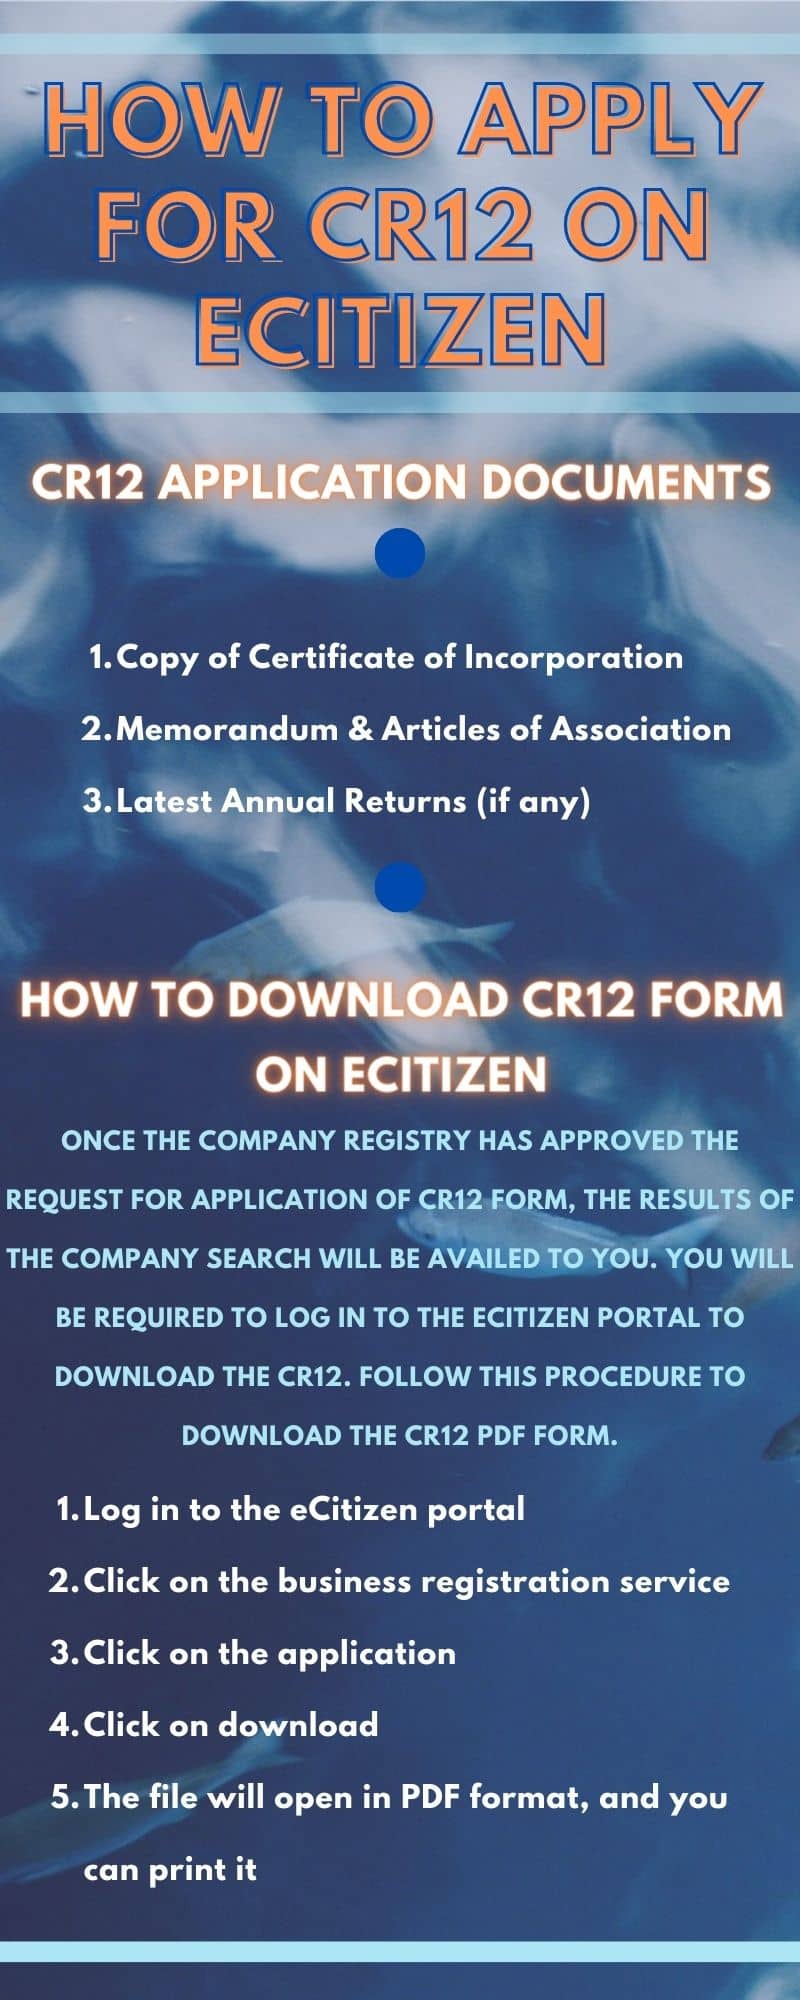 How to apply for CR12 on eCitizen